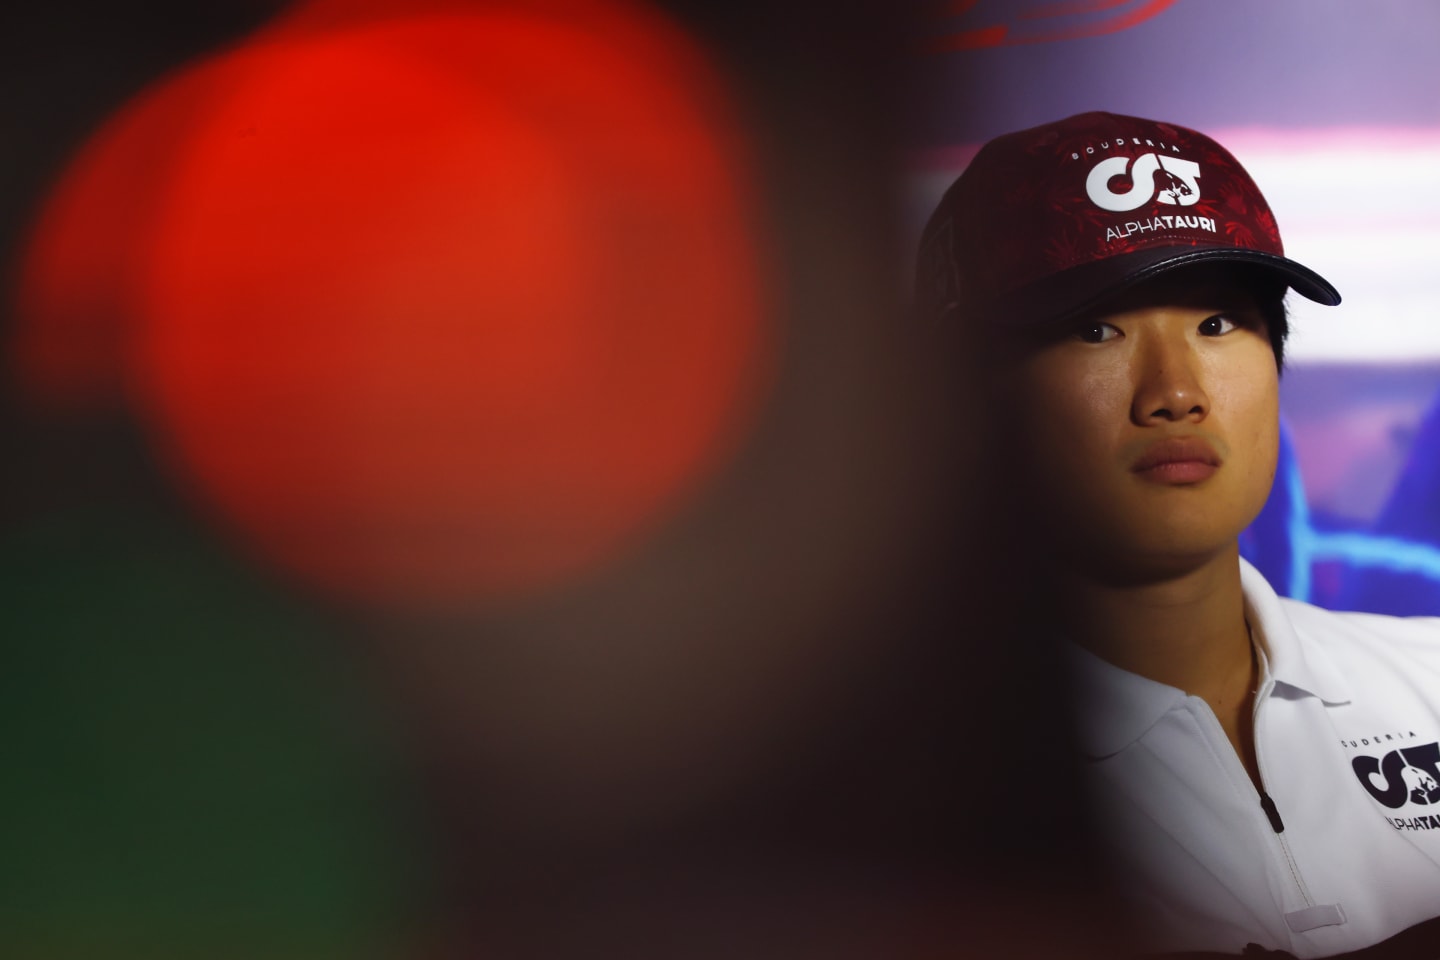 ZANDVOORT, NETHERLANDS - SEPTEMBER 01: Yuki Tsunoda of Japan and Scuderia AlphaTauri looks on in the Drivers Press Conference during previews ahead of the F1 Grand Prix of The Netherlands at Circuit Zandvoort on September 01, 2022 in Zandvoort, Netherlands. (Photo by Lars Baron/Getty Images)